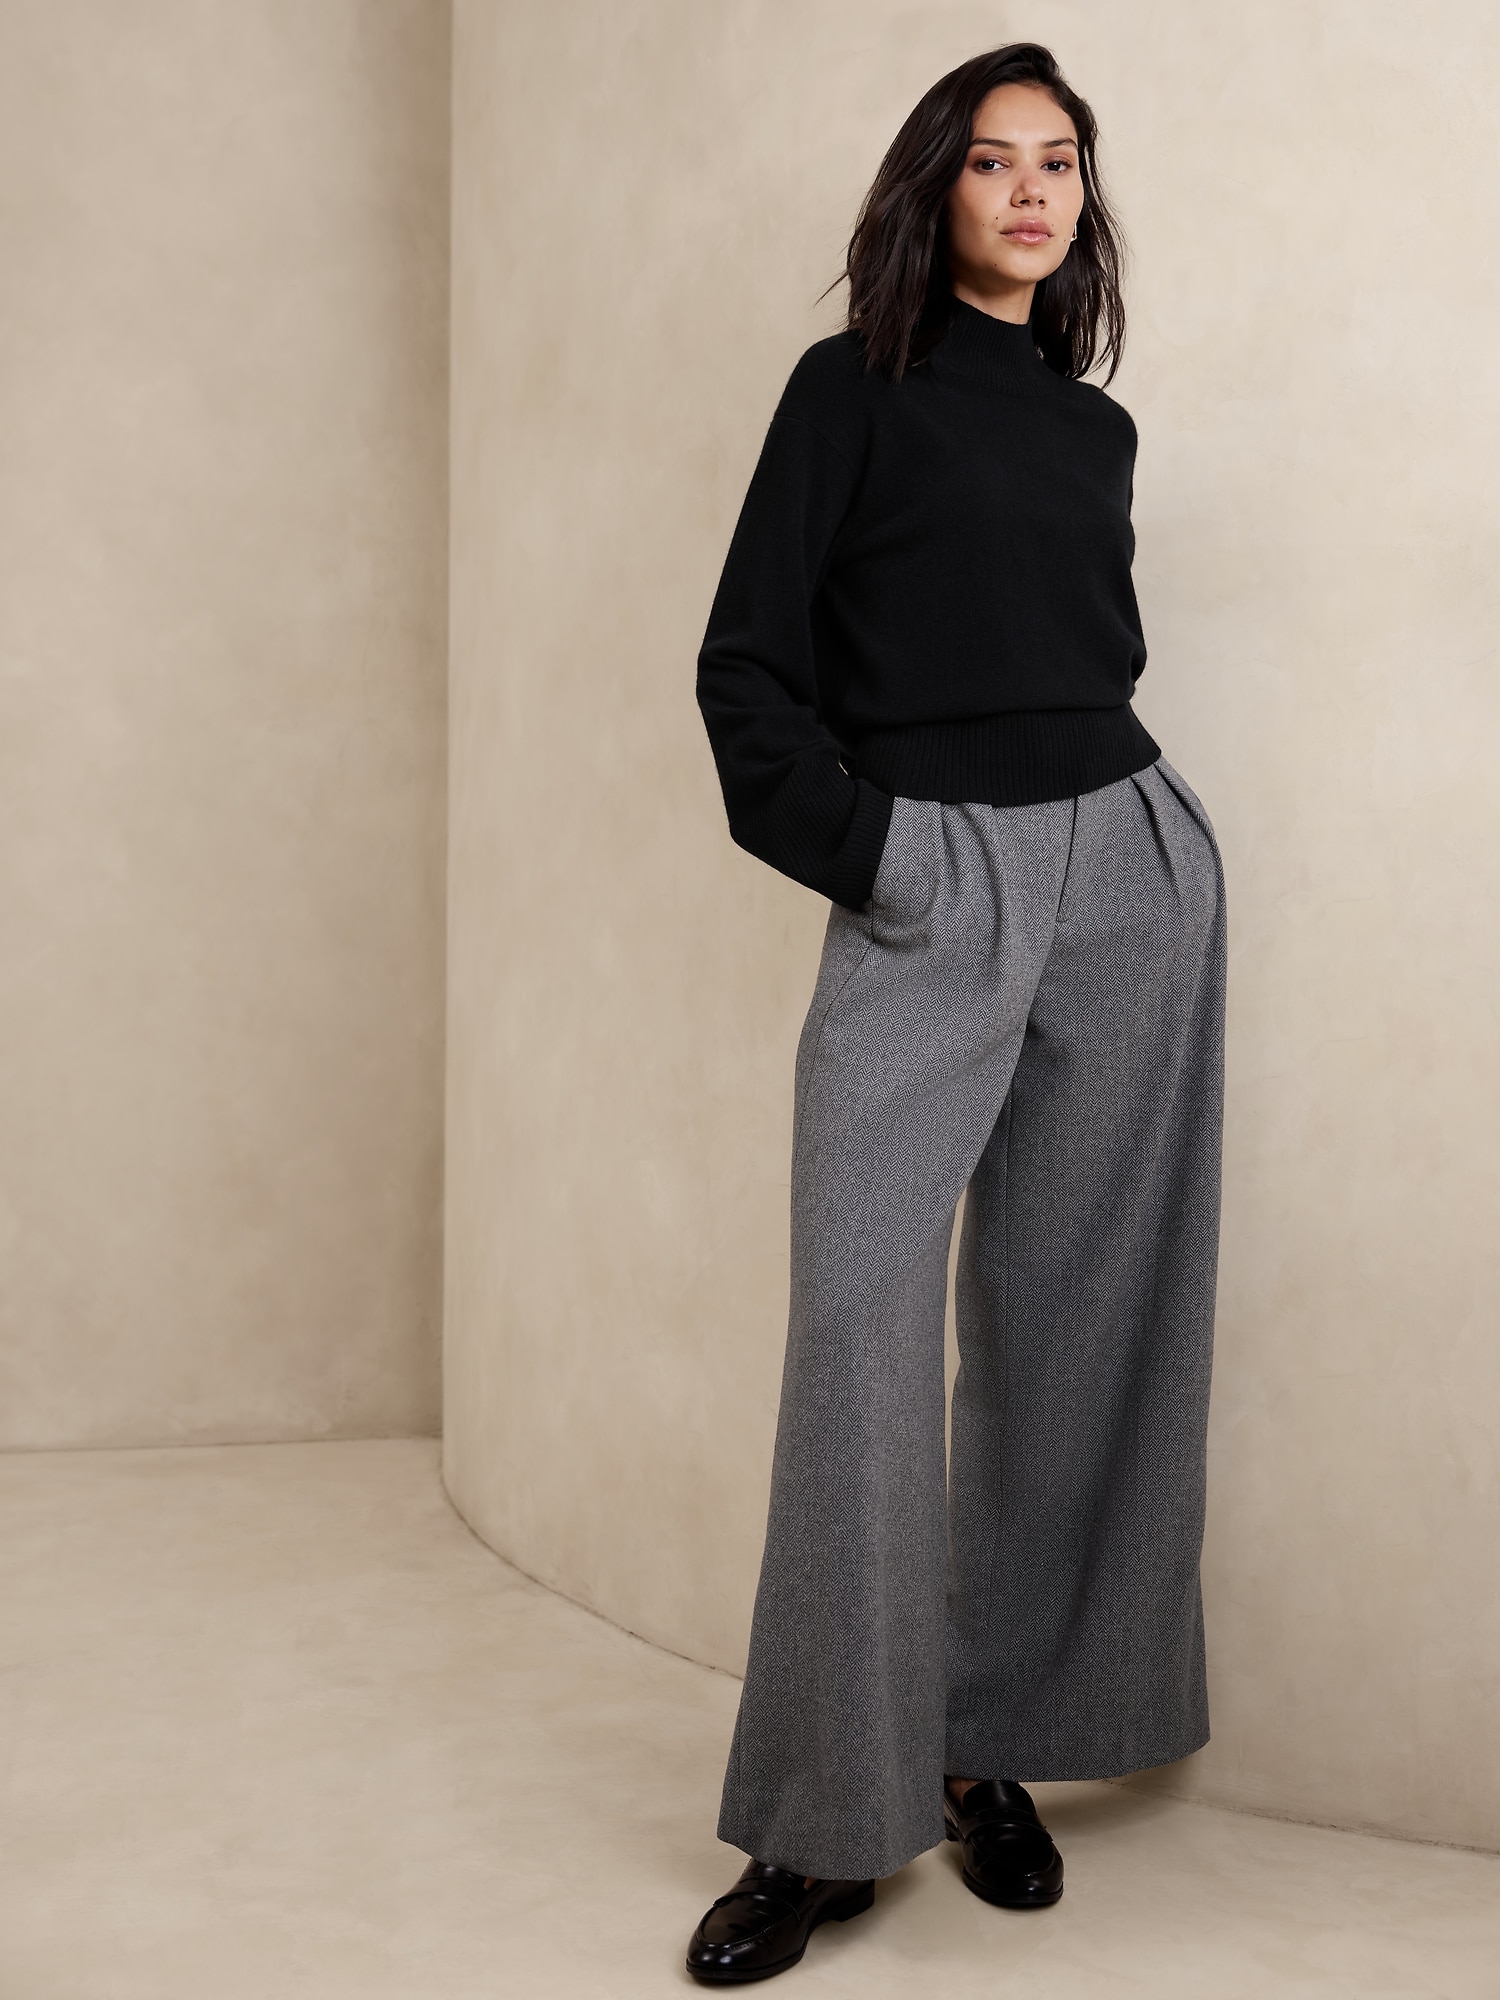 Cashmere Bell-Sleeve Sweater | Banana Republic Factory